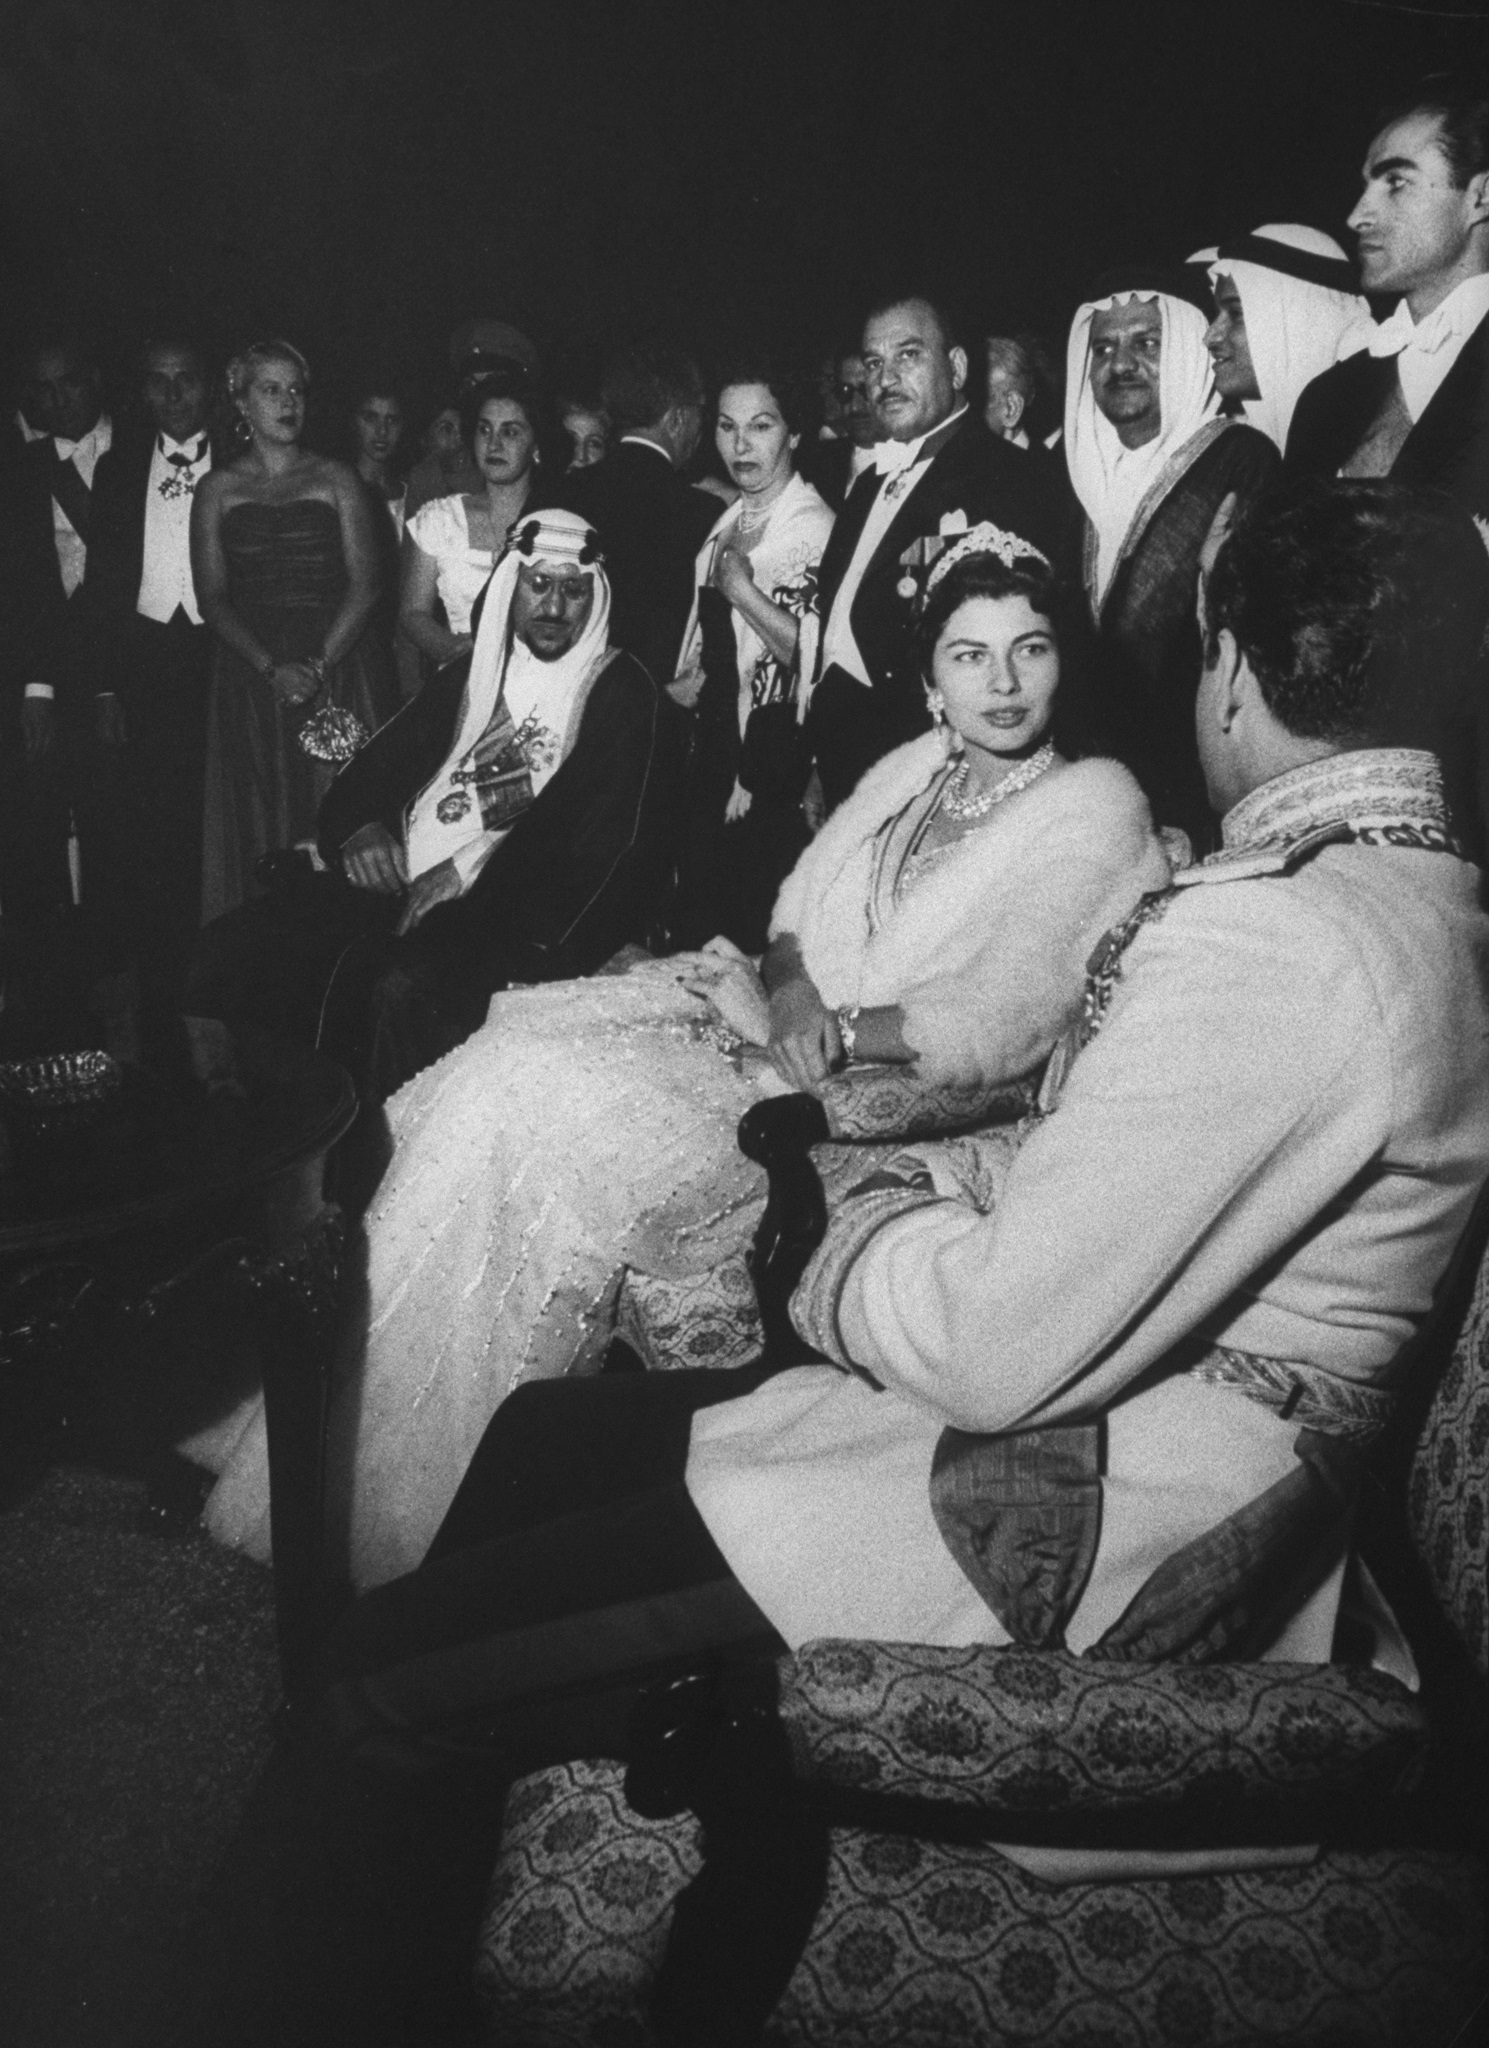 Mohamed Reza (R seated) sitting next to his wife at the garden party honoring King Saud Ibn Abdul Aziz's (3rd R) during his visit. (Photo by James WhitmoreTime Life PicturesGettyimages)